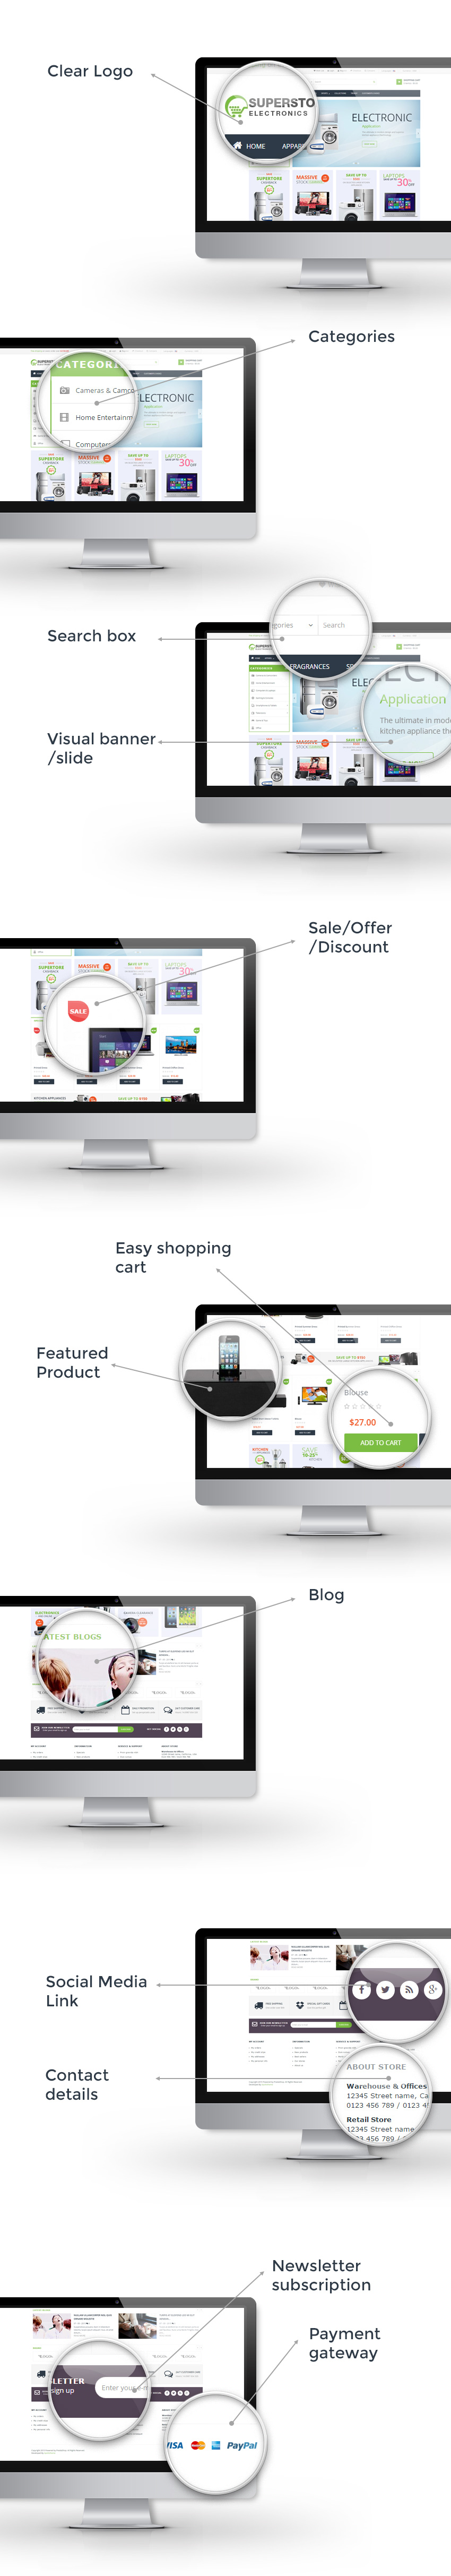 feature for e-commerce site